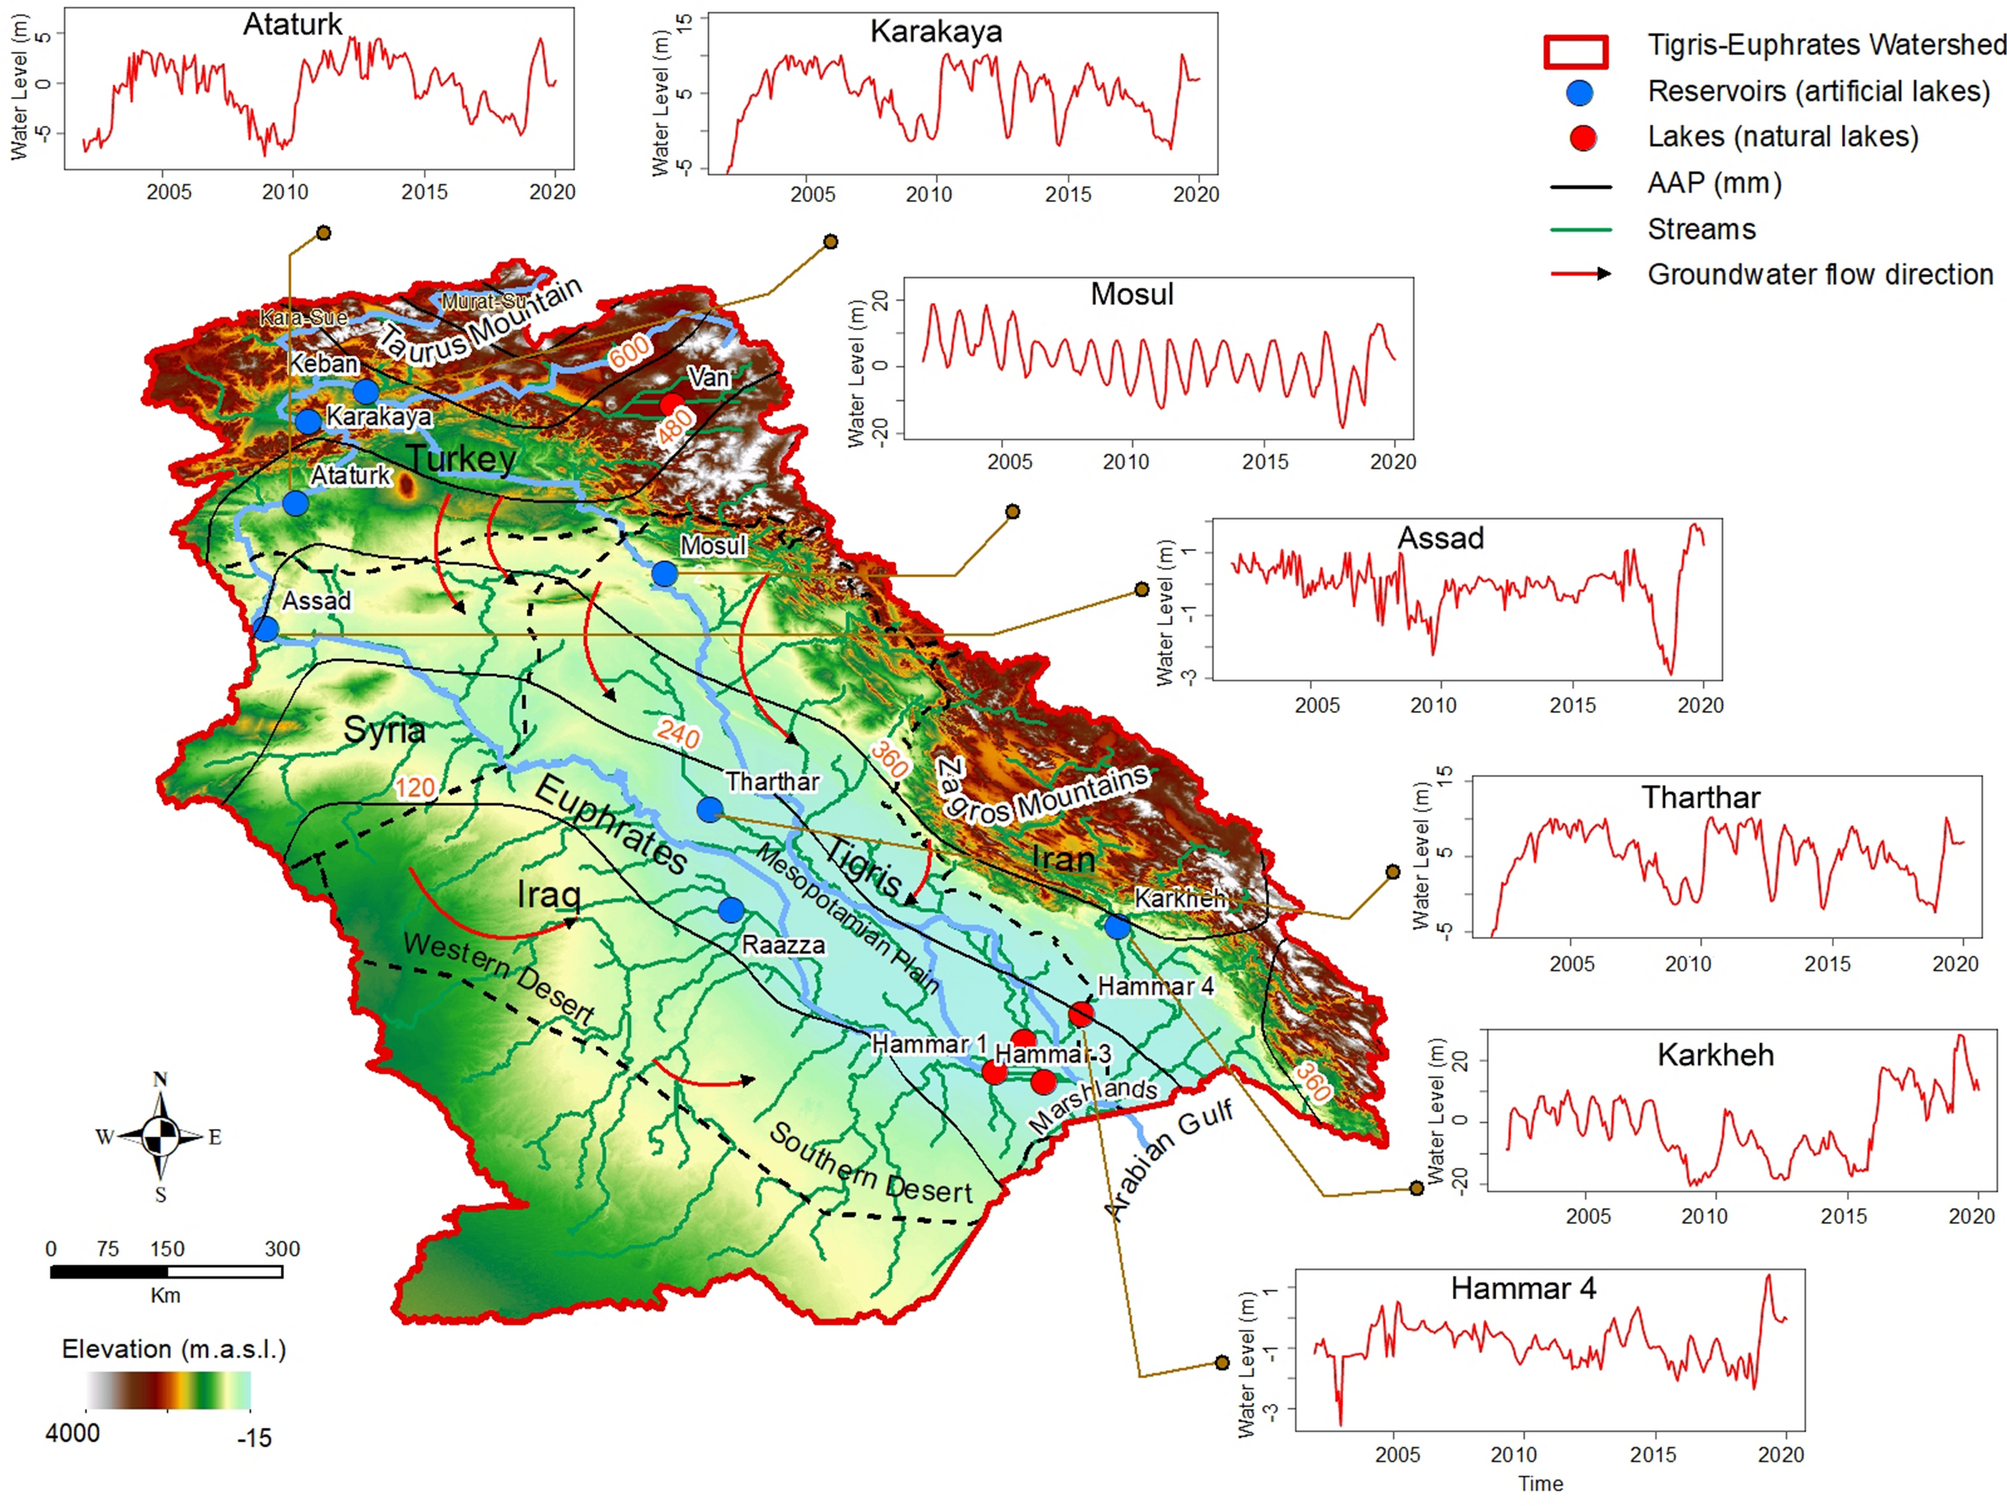 Buffering the impacts of extreme climate variability in the highly  engineered Tigris Euphrates river system | Scientific Reports